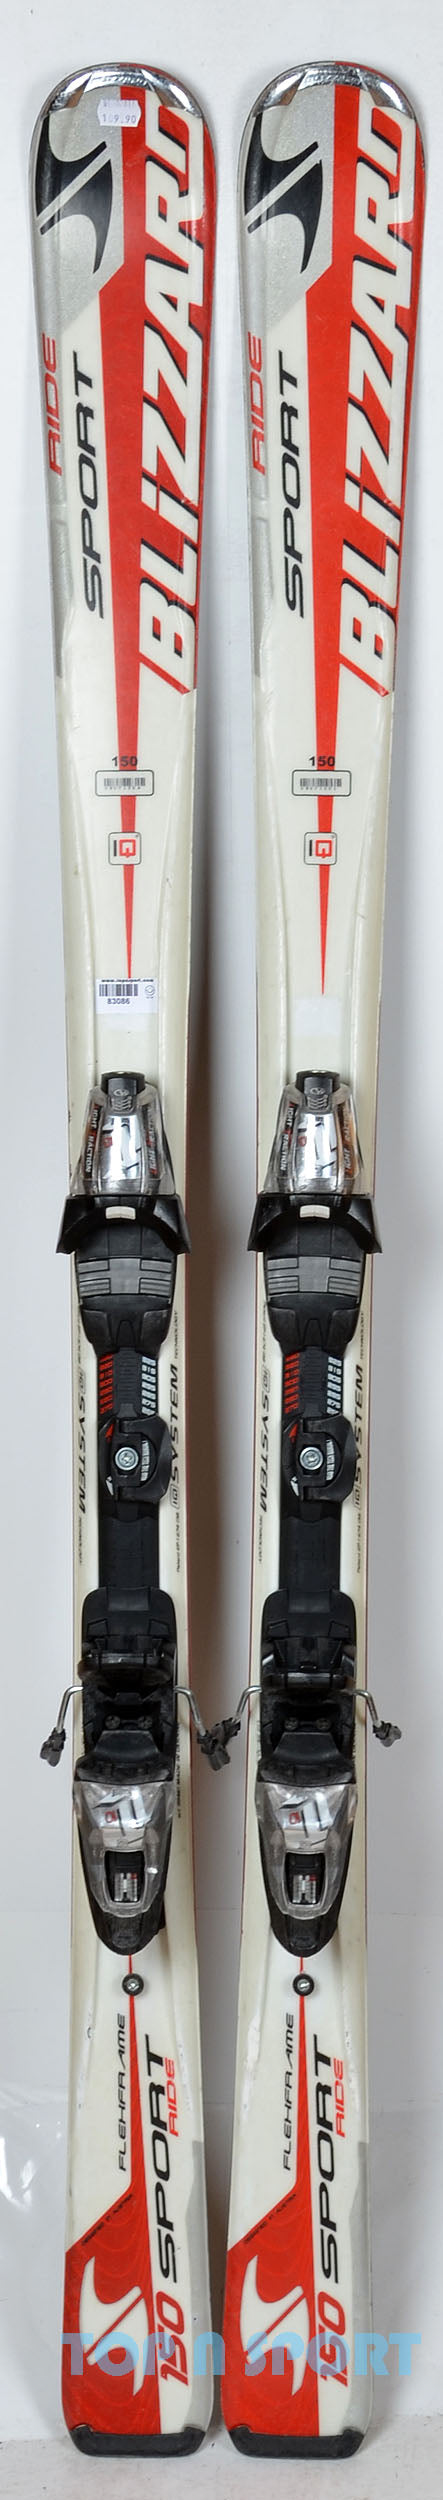 Blizzard SPORT RIDE - skis d'occasion